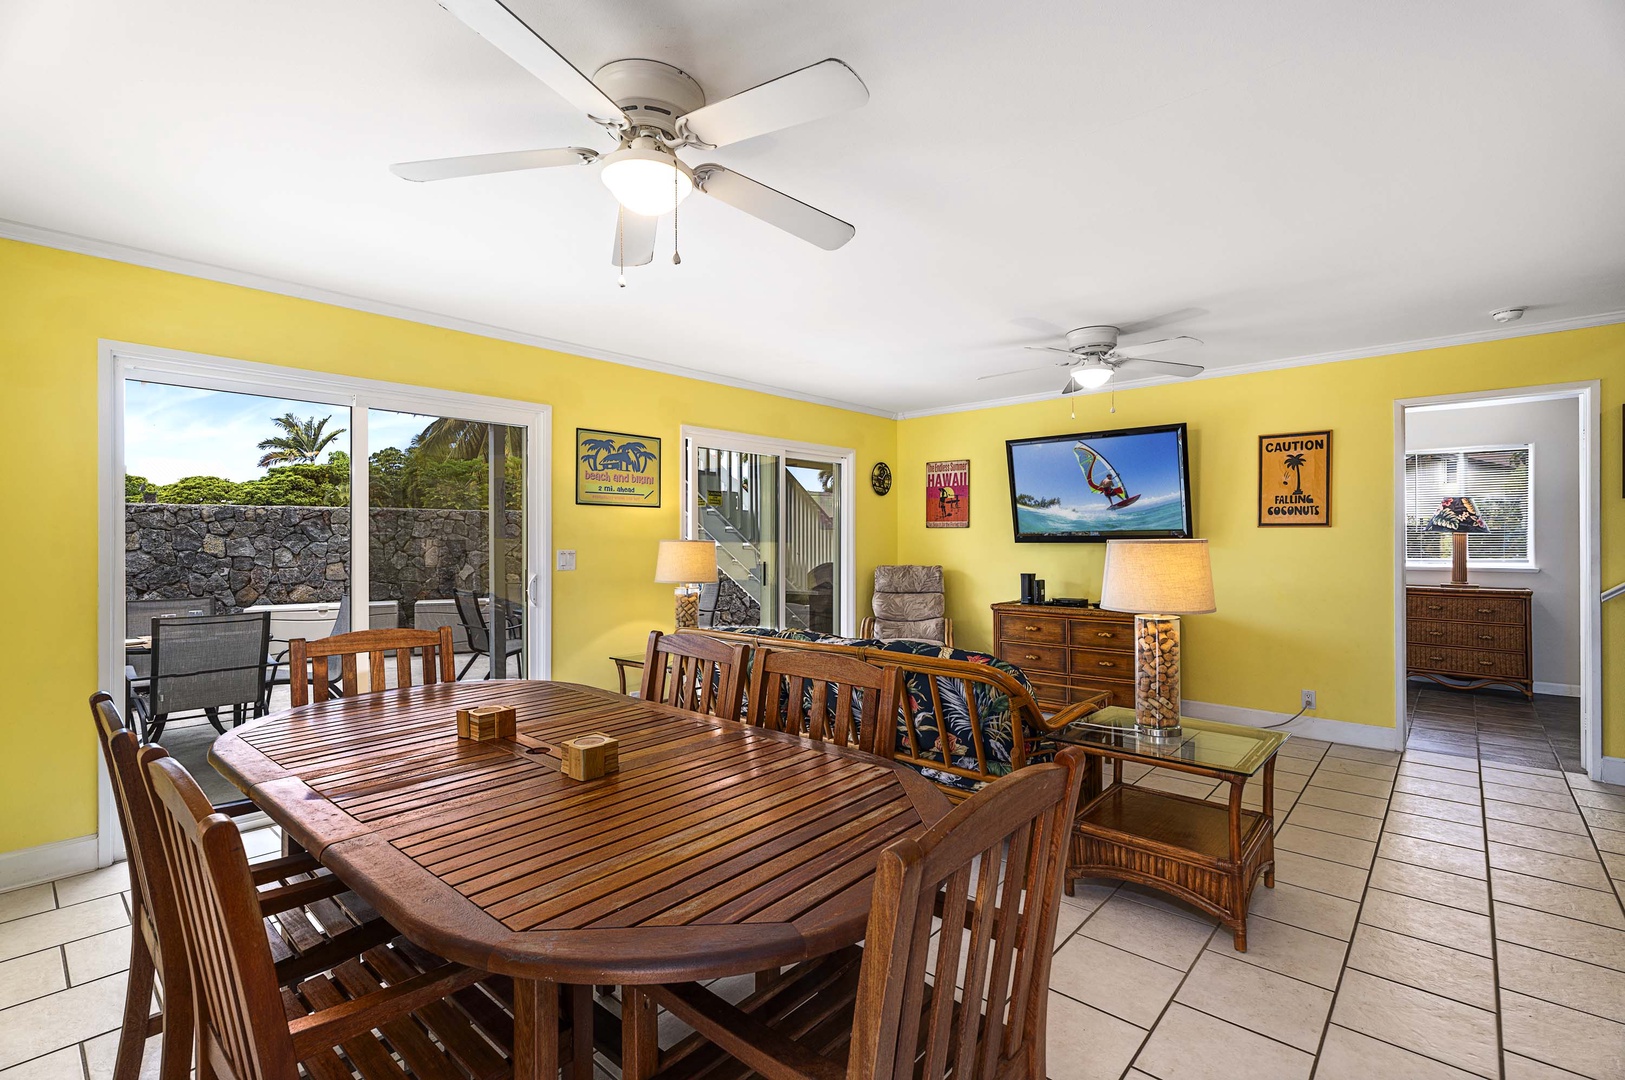 Kailua Kona Vacation Rentals, Hale A Kai - Open sightlines from the dining too living room